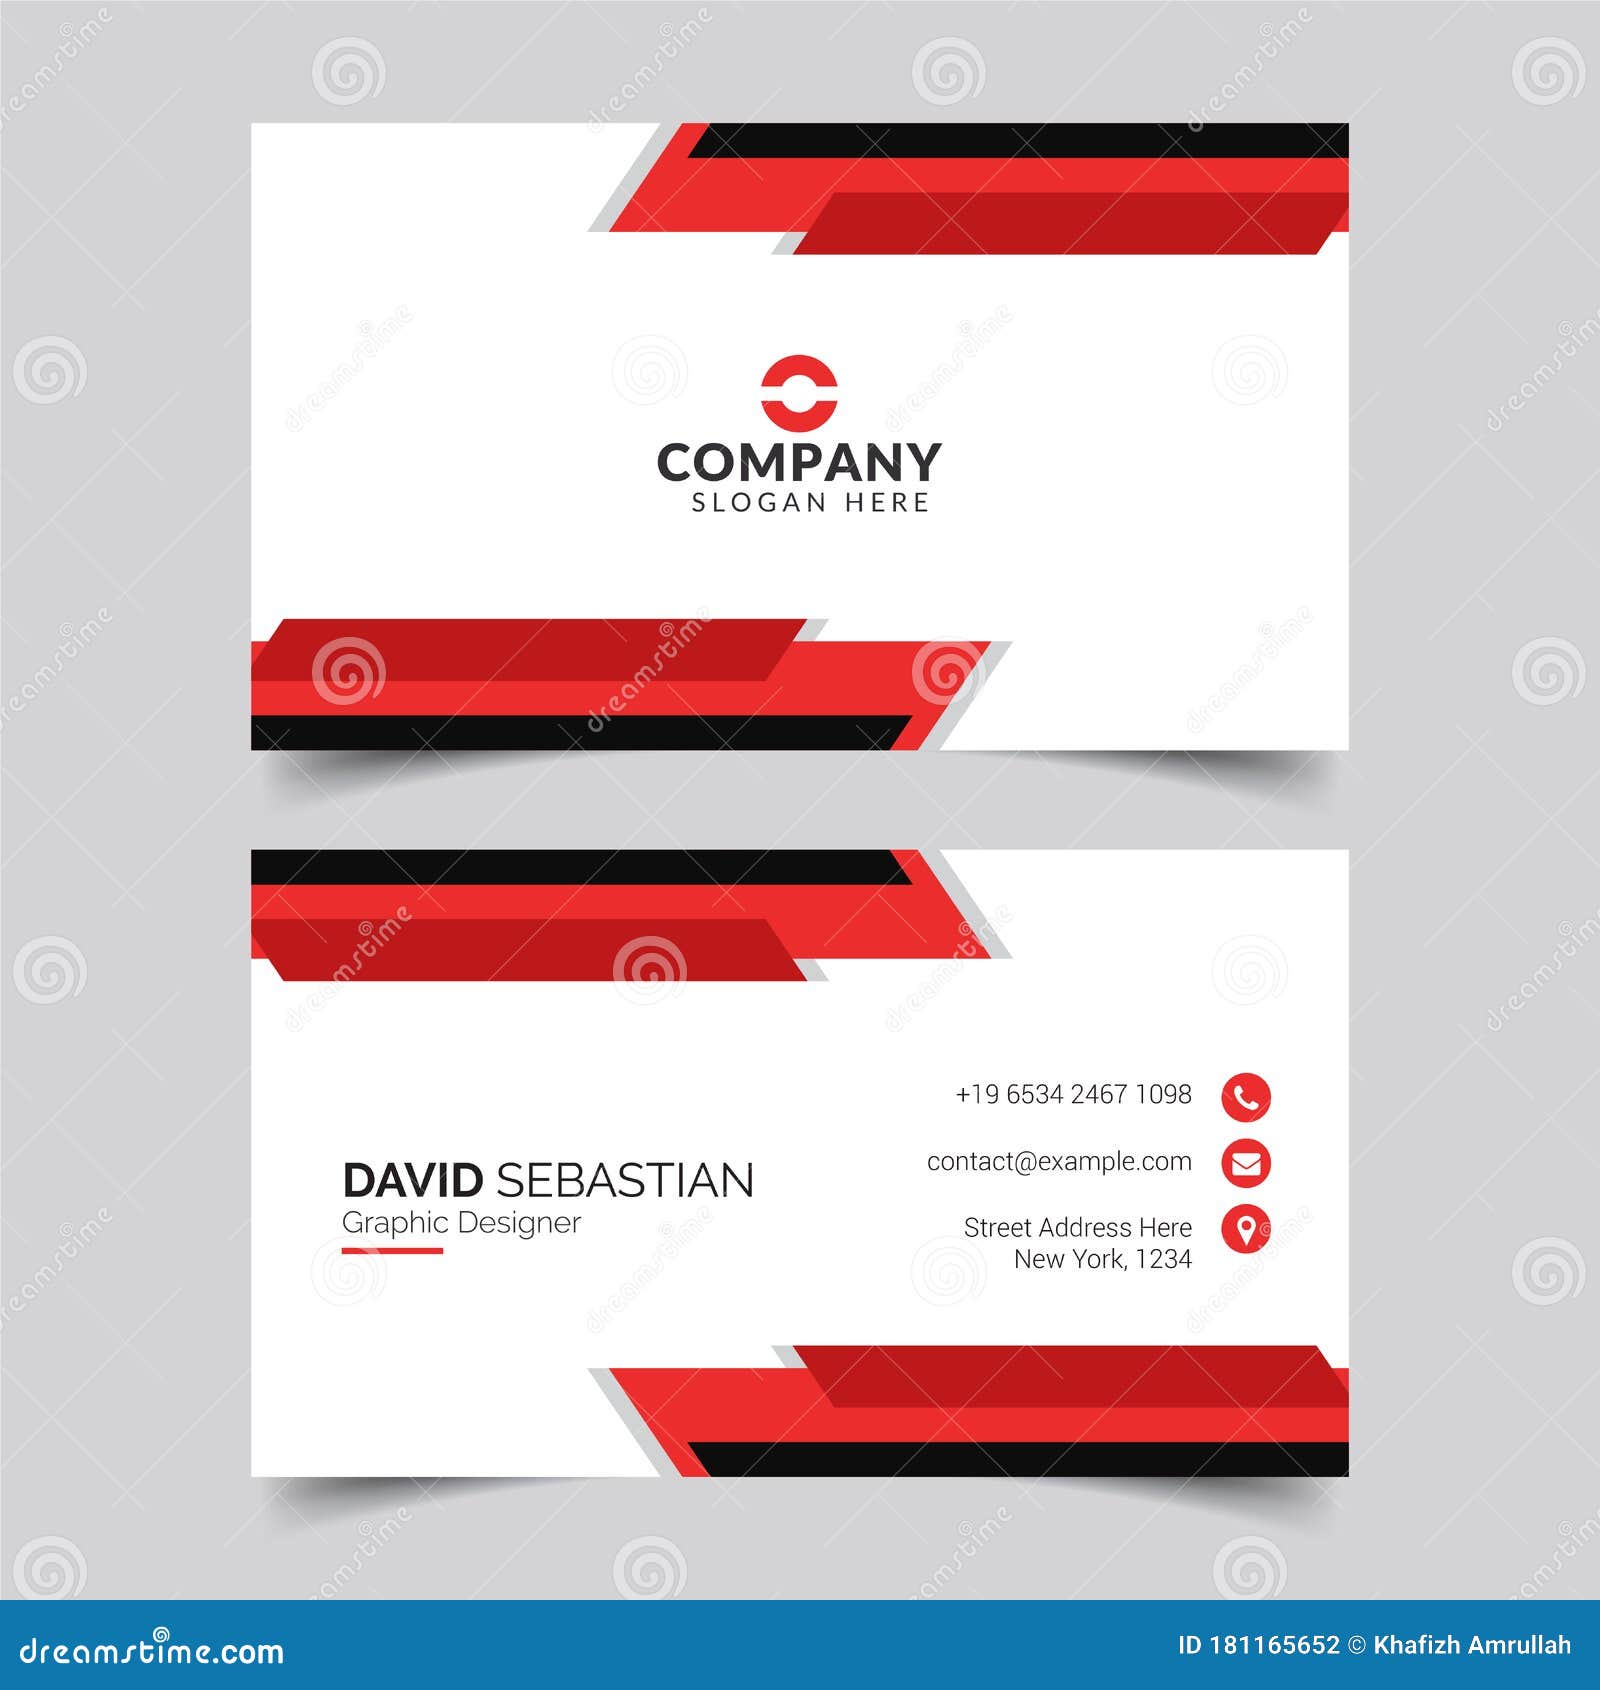 Modern and Clean Business Card Design Template. Minimal Corporate Regarding Template For Calling Card